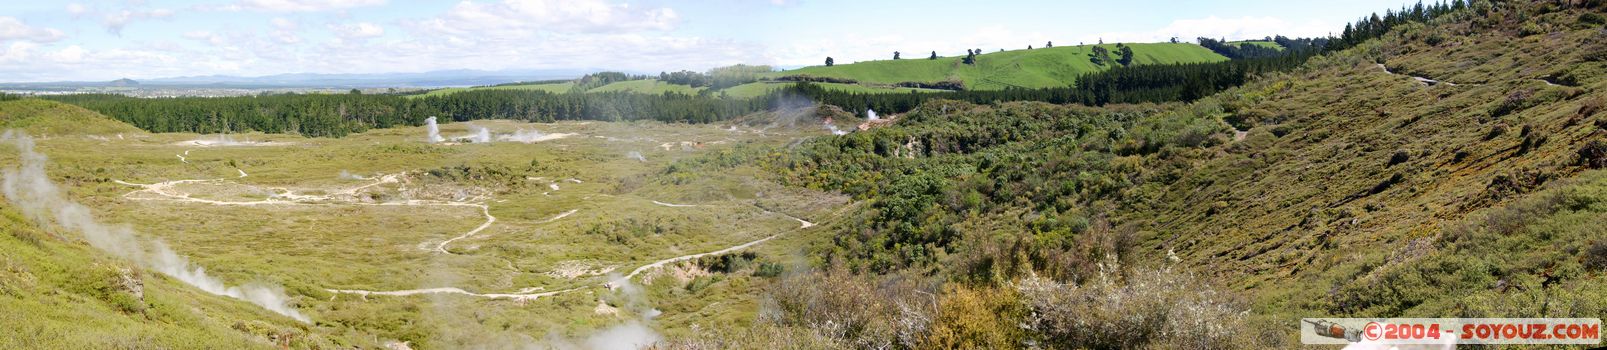 Taupo - Craters of the Moon - panorama
Mots-clés: New Zealand North Island geyser Thermes panorama